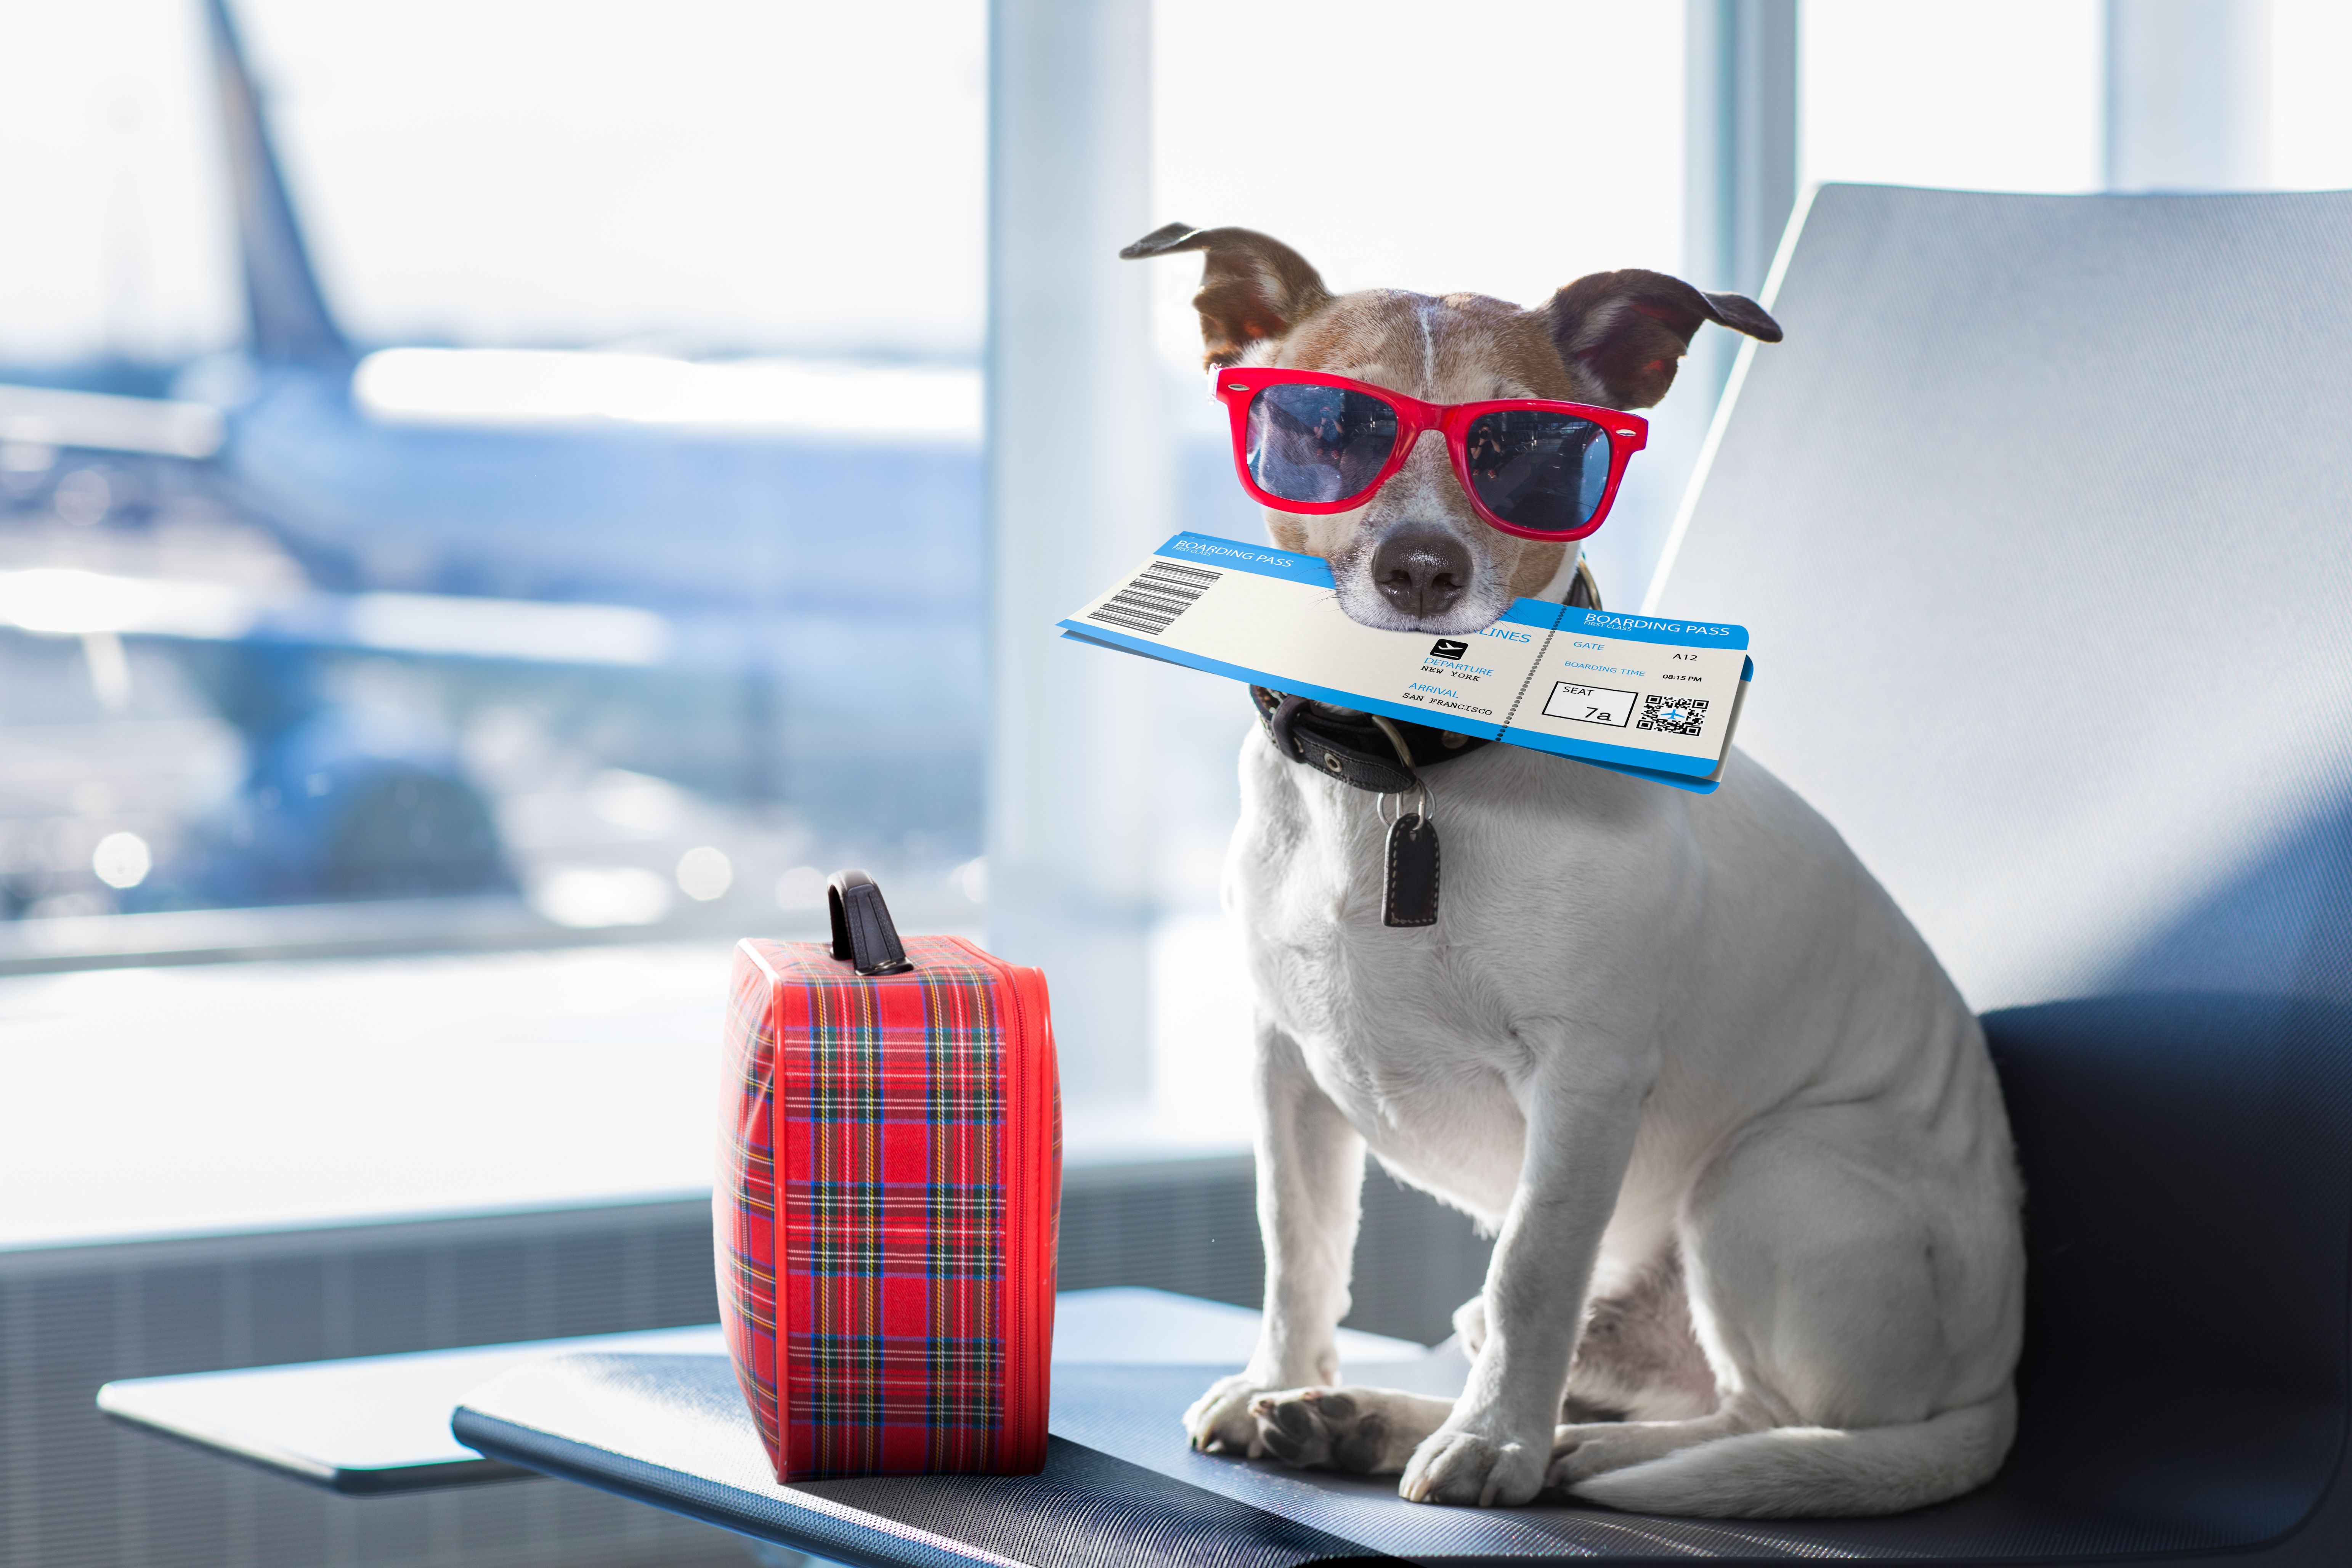 A Dog in an airport with a boarding pass and sunglasses.